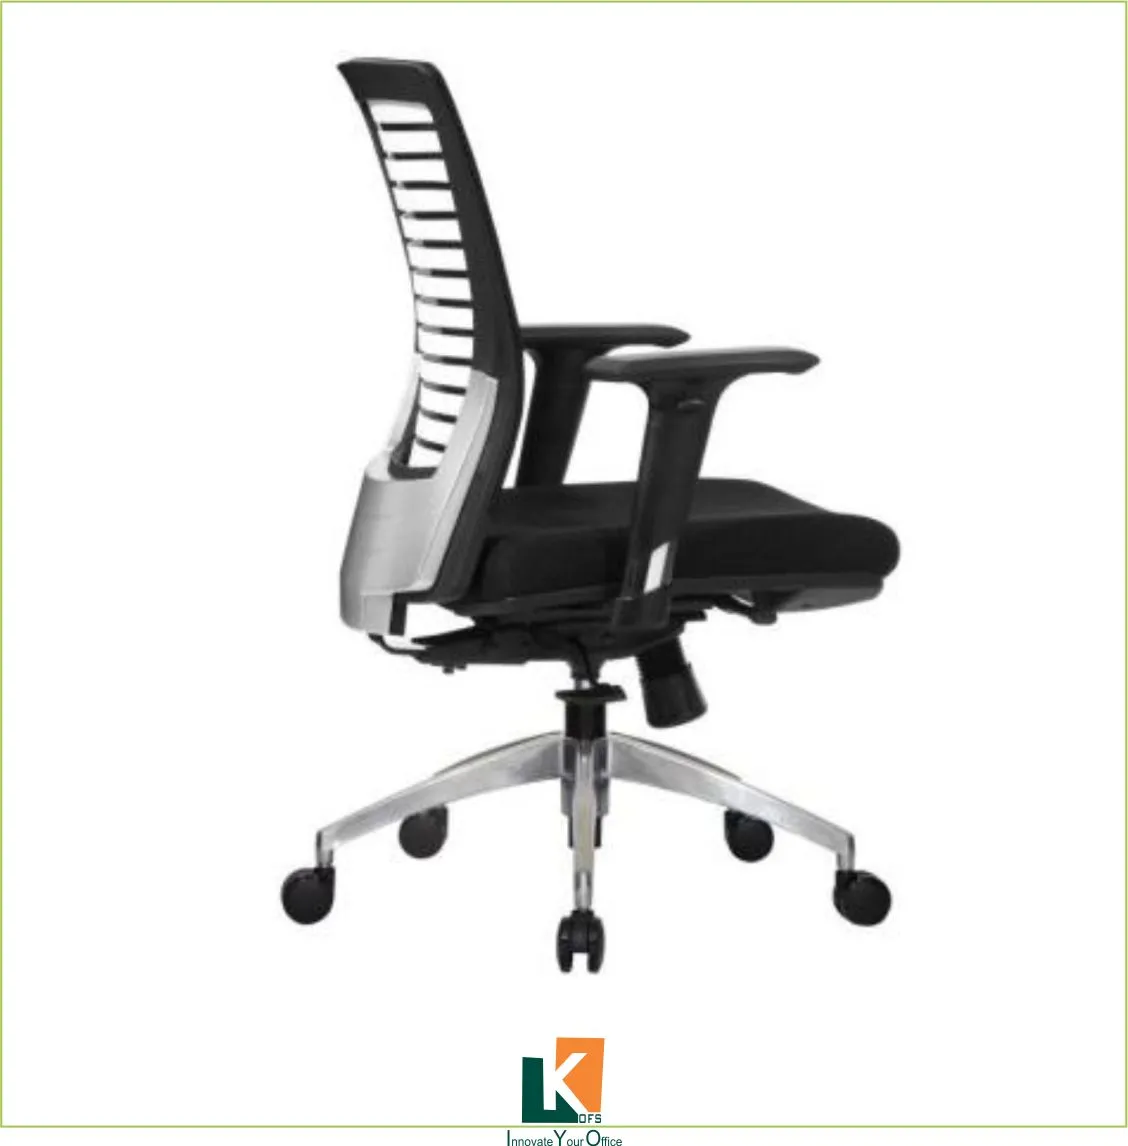 Low Back workstation chair